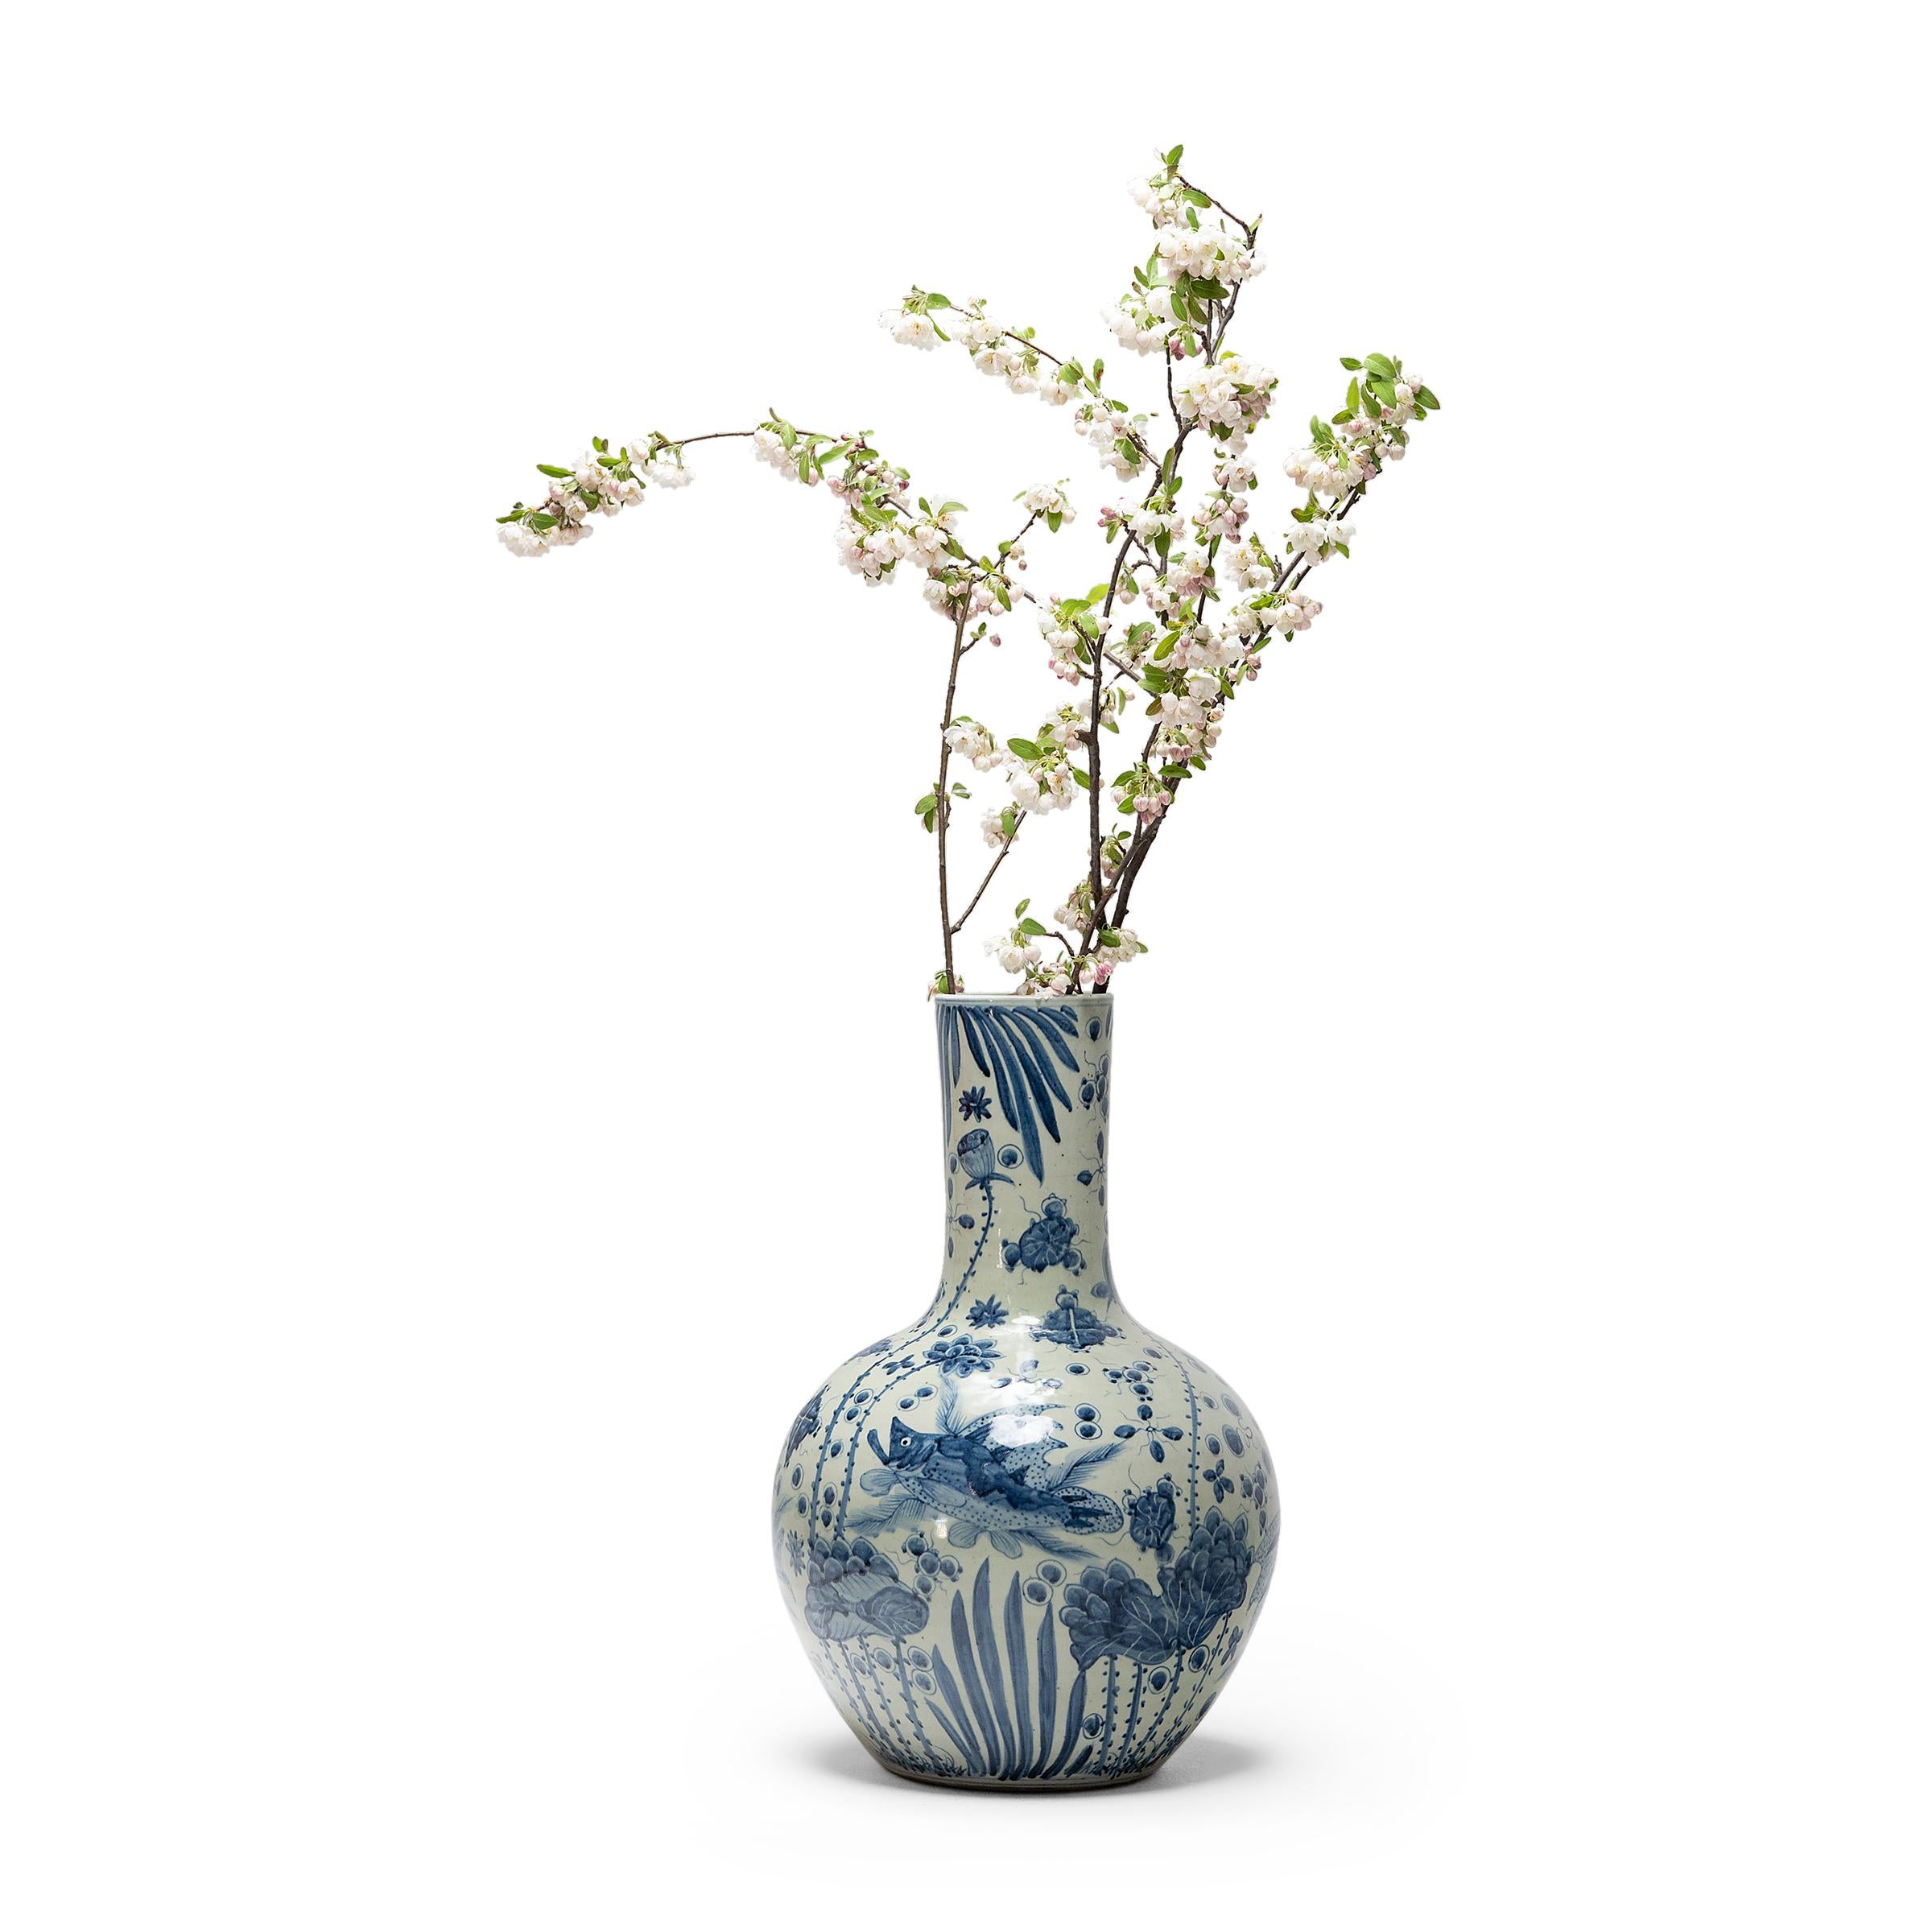 Elaborately finned fish make their way in a vibrant underwater world on this tall blue-and-white gooseneck vase. Patterned with real and abstract forms, this ceramic vase is a contemporary take on traditional Chinese blue-and-white porcelain. The